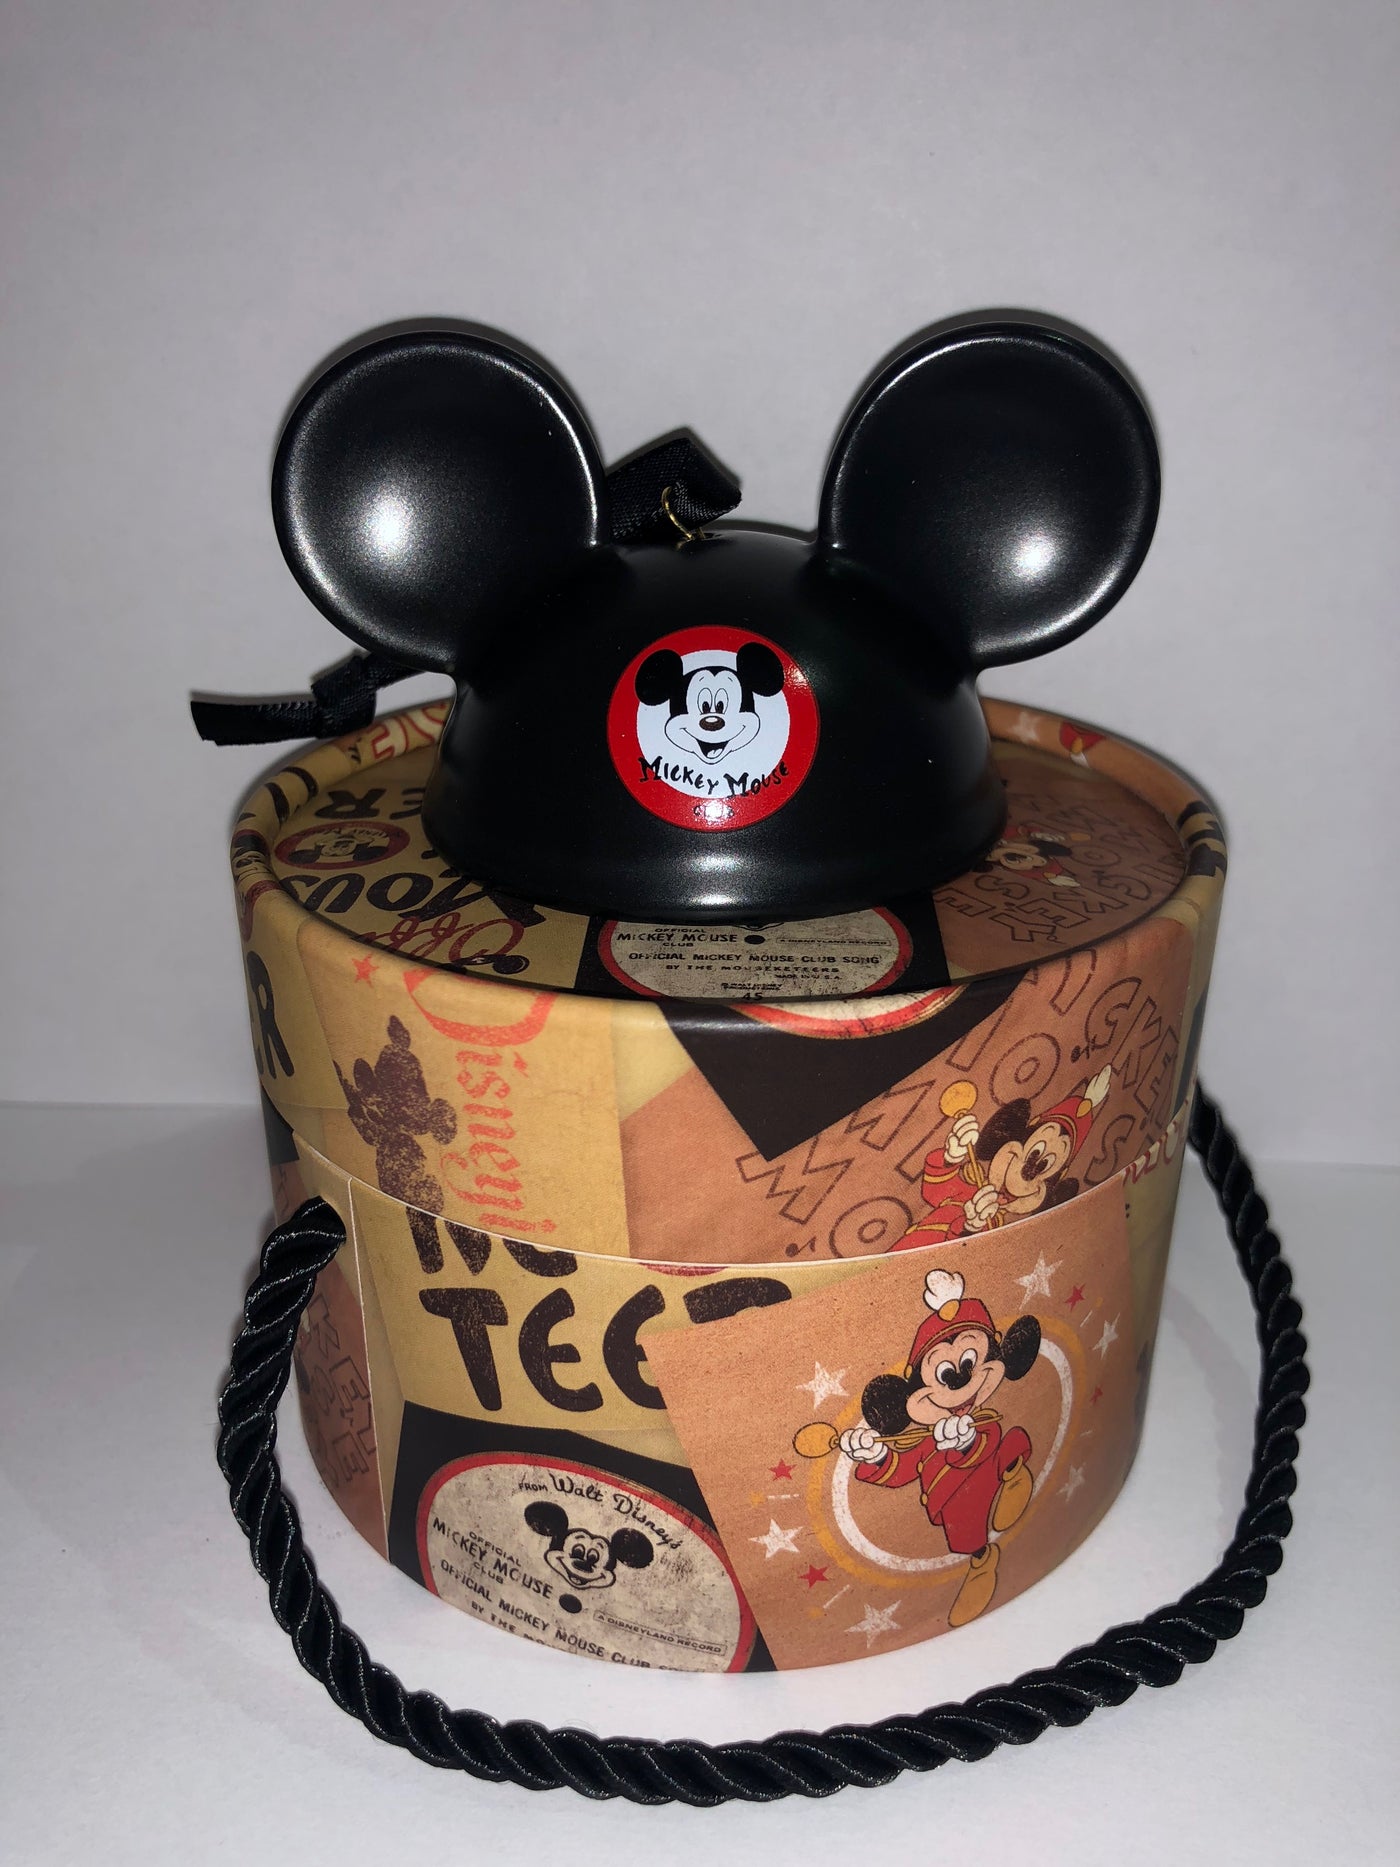 Disney Parks Mickey Mouse Mouseketeer Ear Hat Ornament New with Box